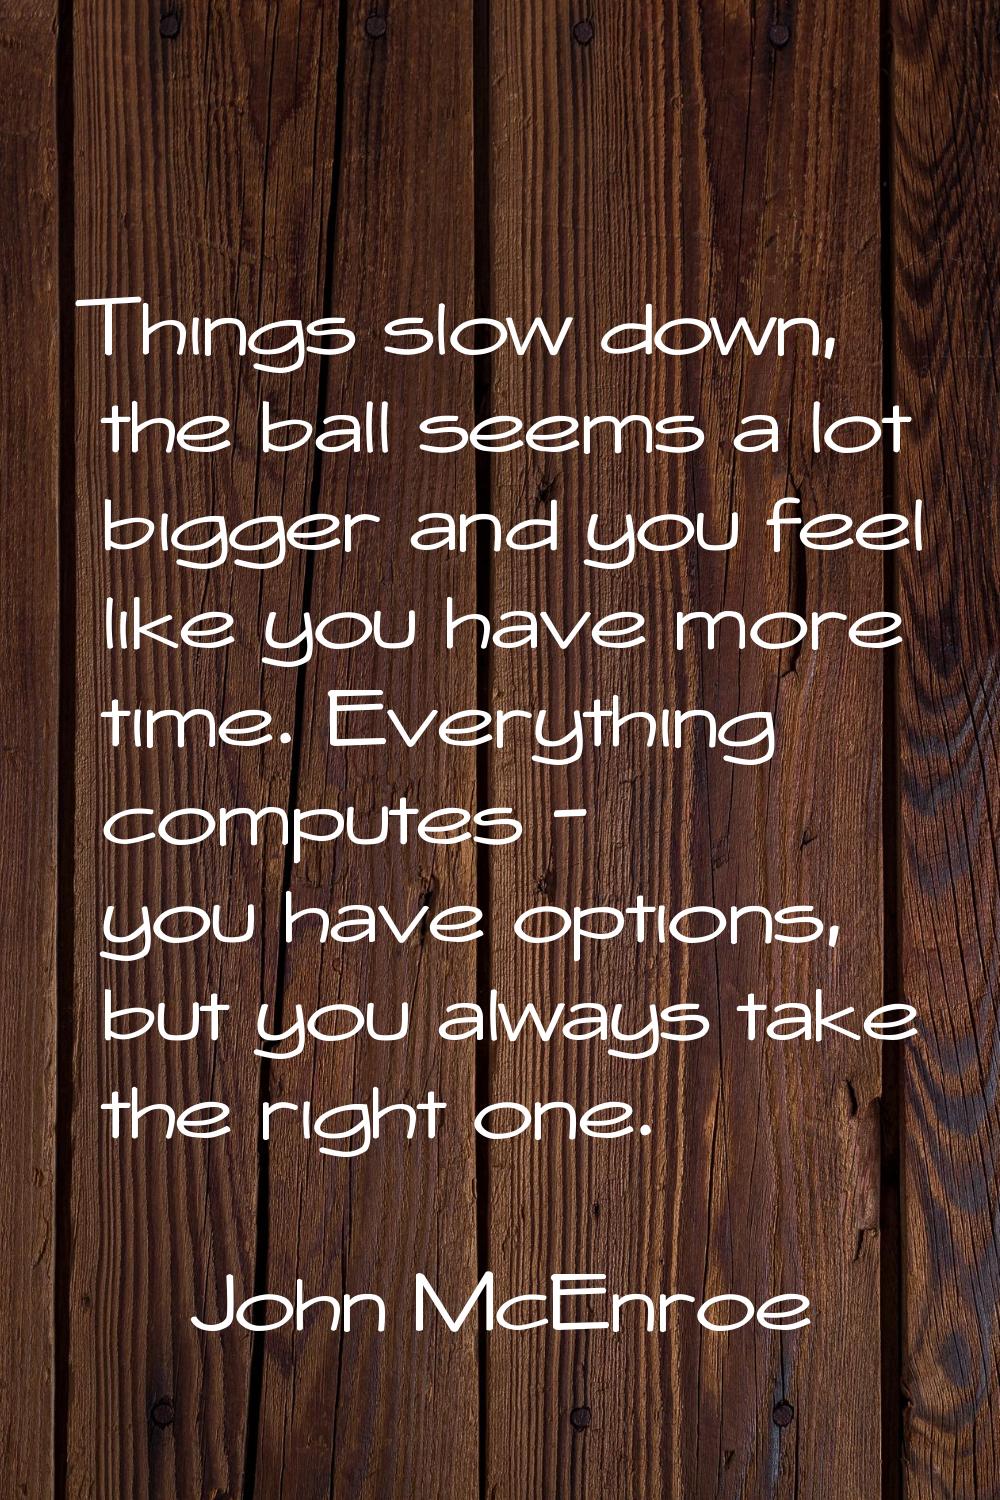 Things slow down, the ball seems a lot bigger and you feel like you have more time. Everything comp